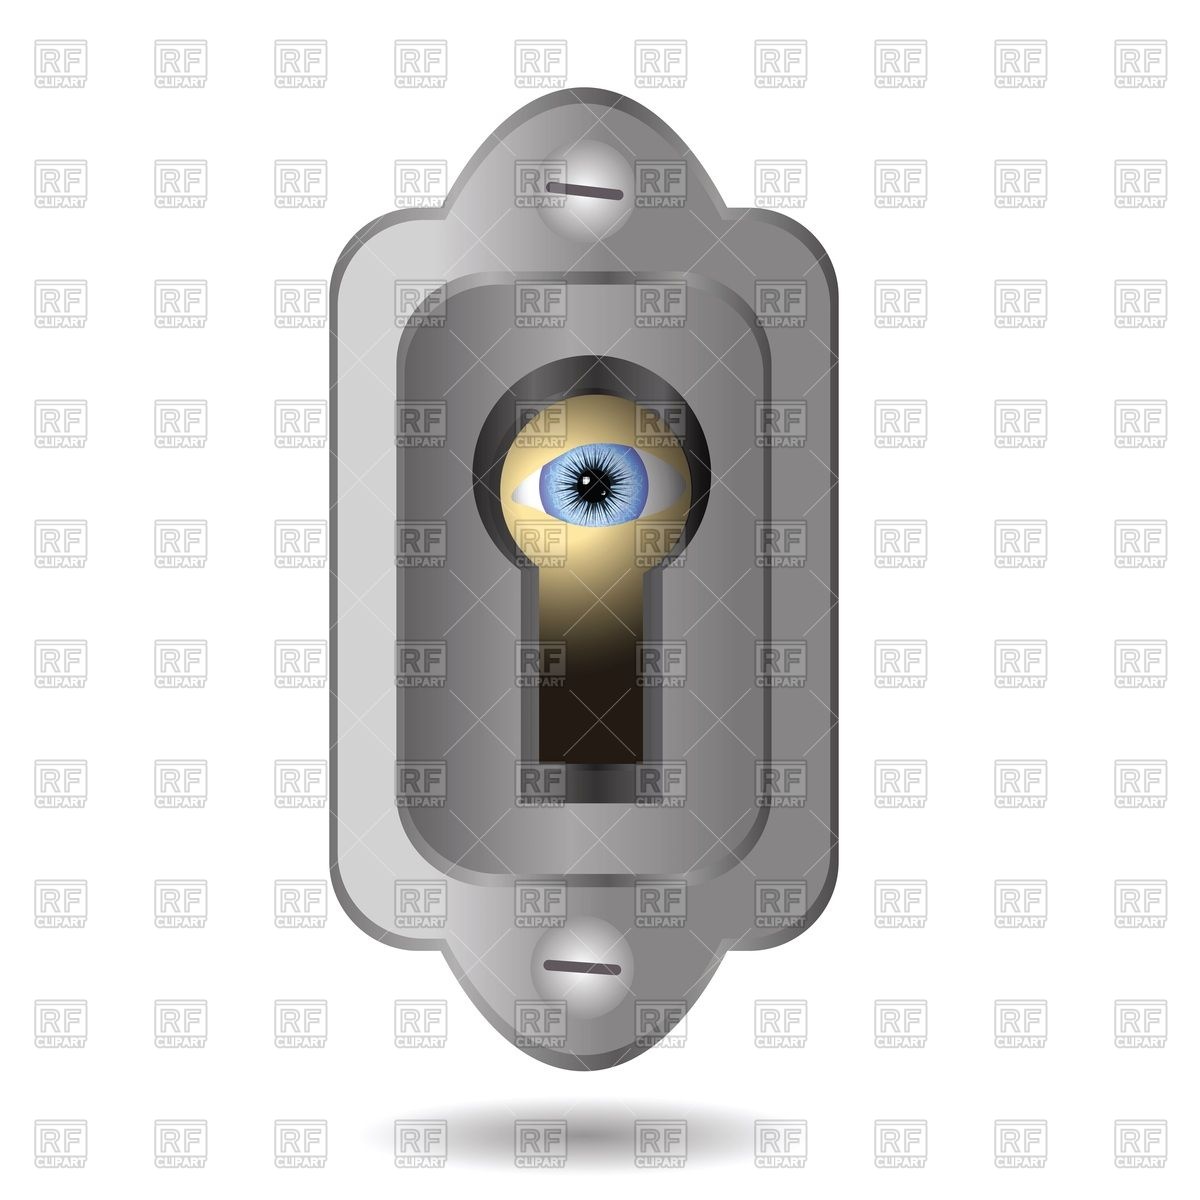 Keyhole With Eye Inside Download Royalty Free Vector Clipart  Eps